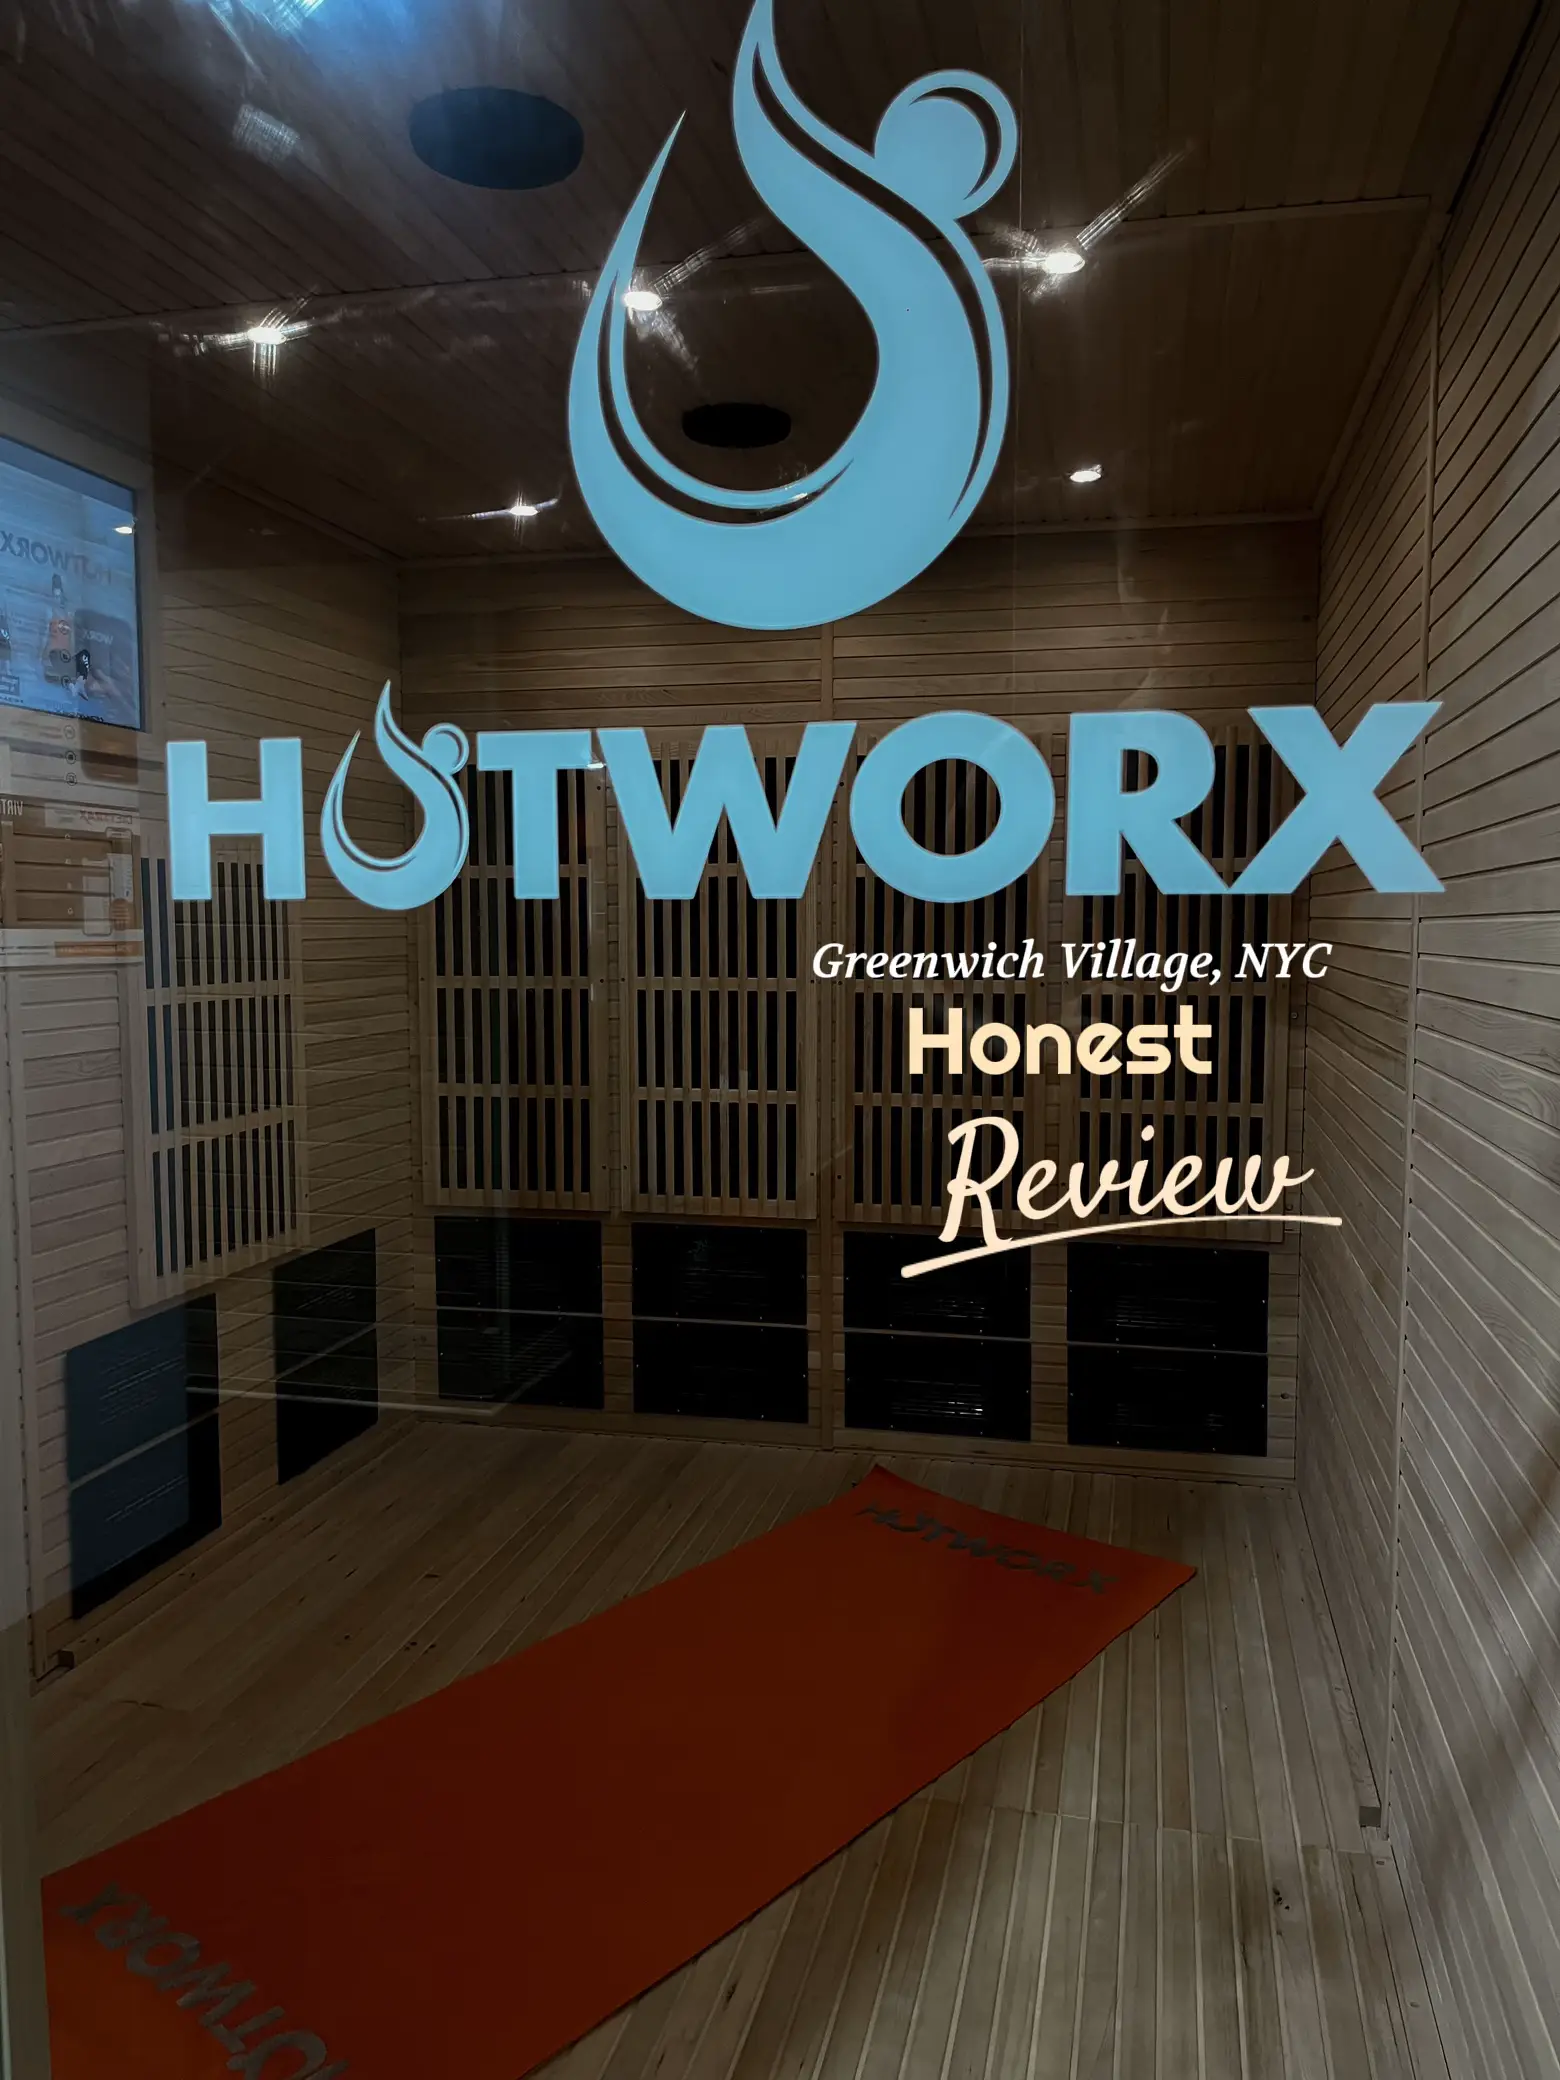 🔥 HOTWORX! The 24-Hour Infrared Fitness Studio is taking over NYC